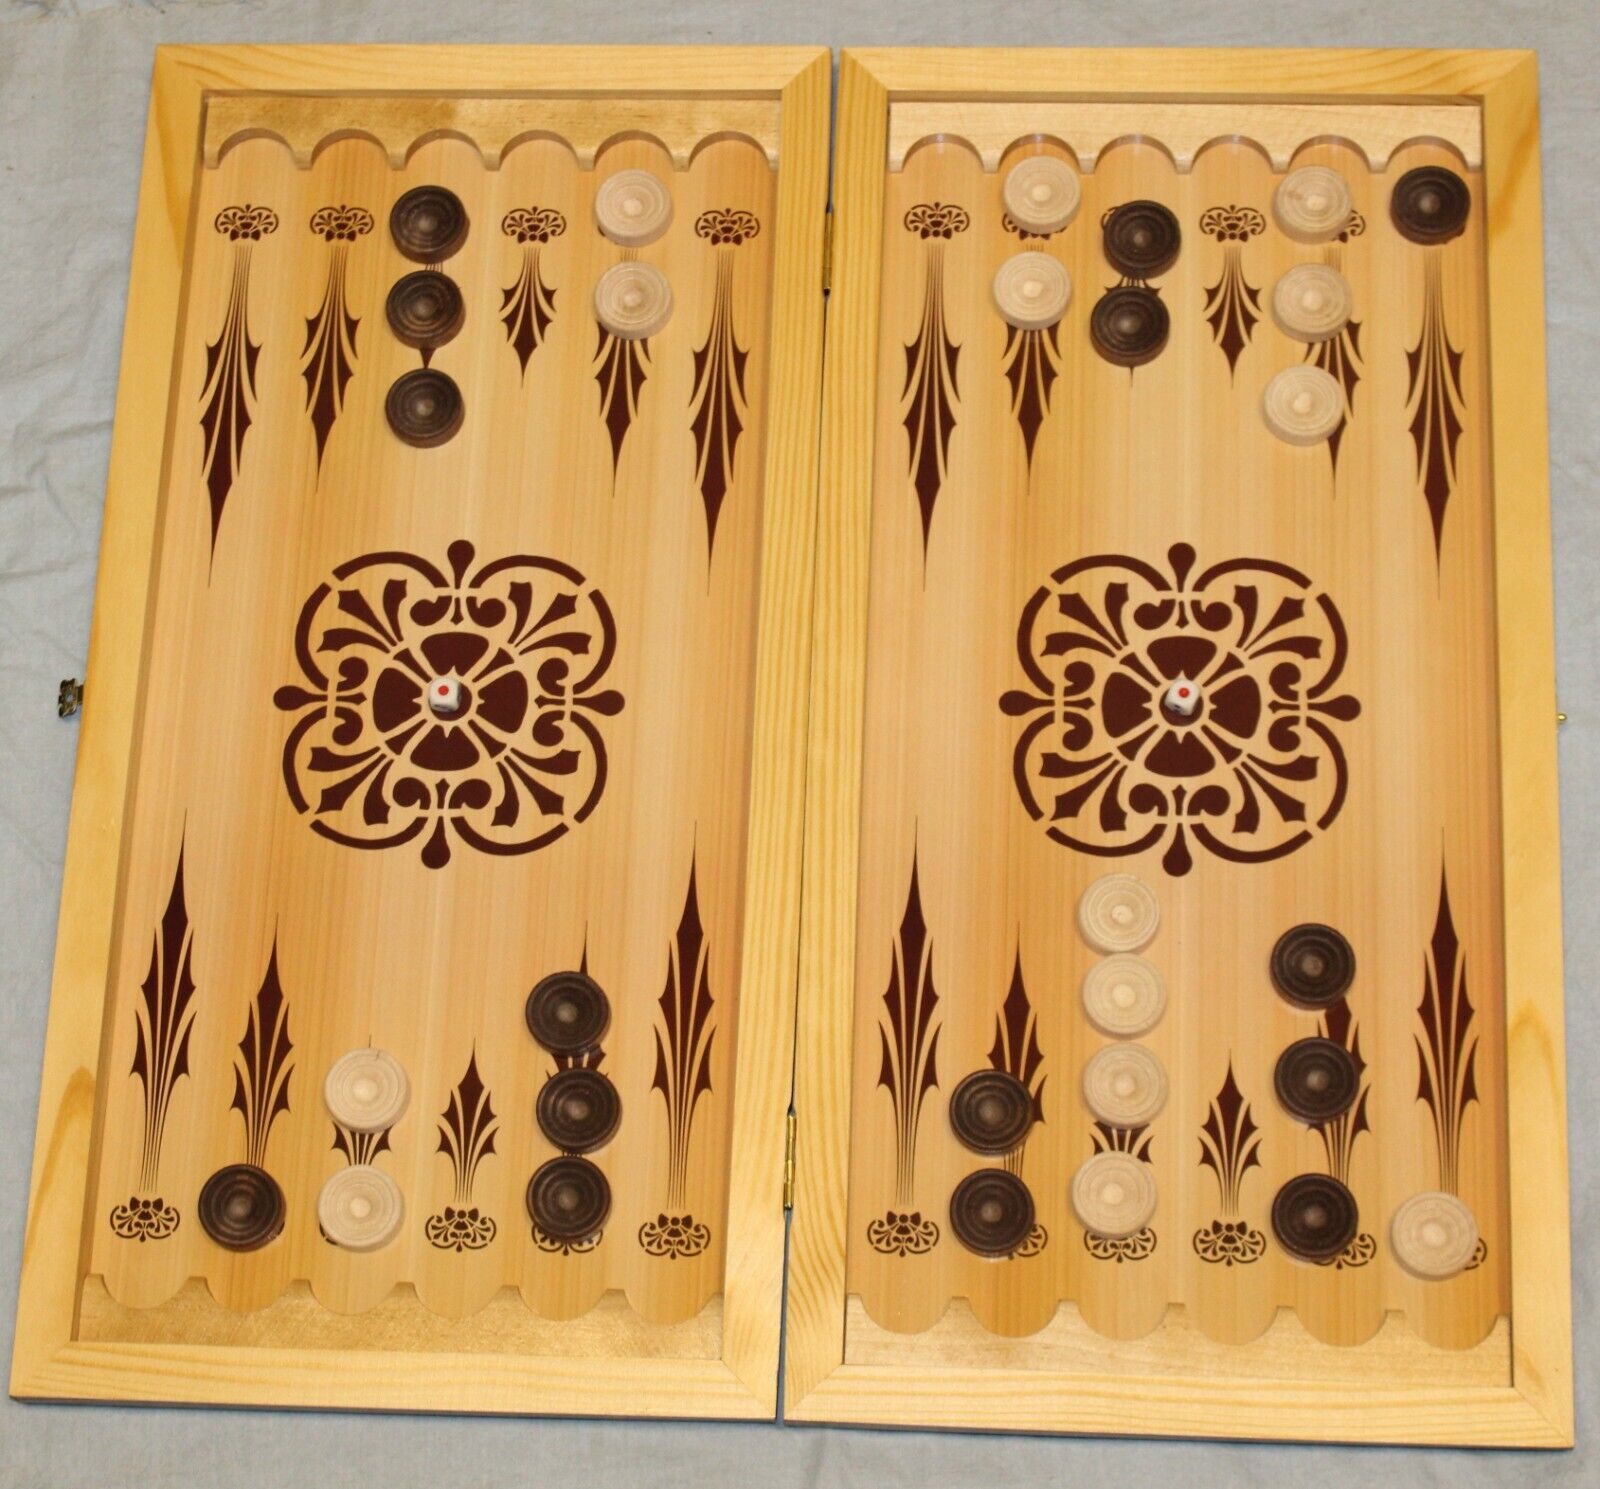 11450.Russian Checkers / Backgammon Set «Wolf and Eagle»